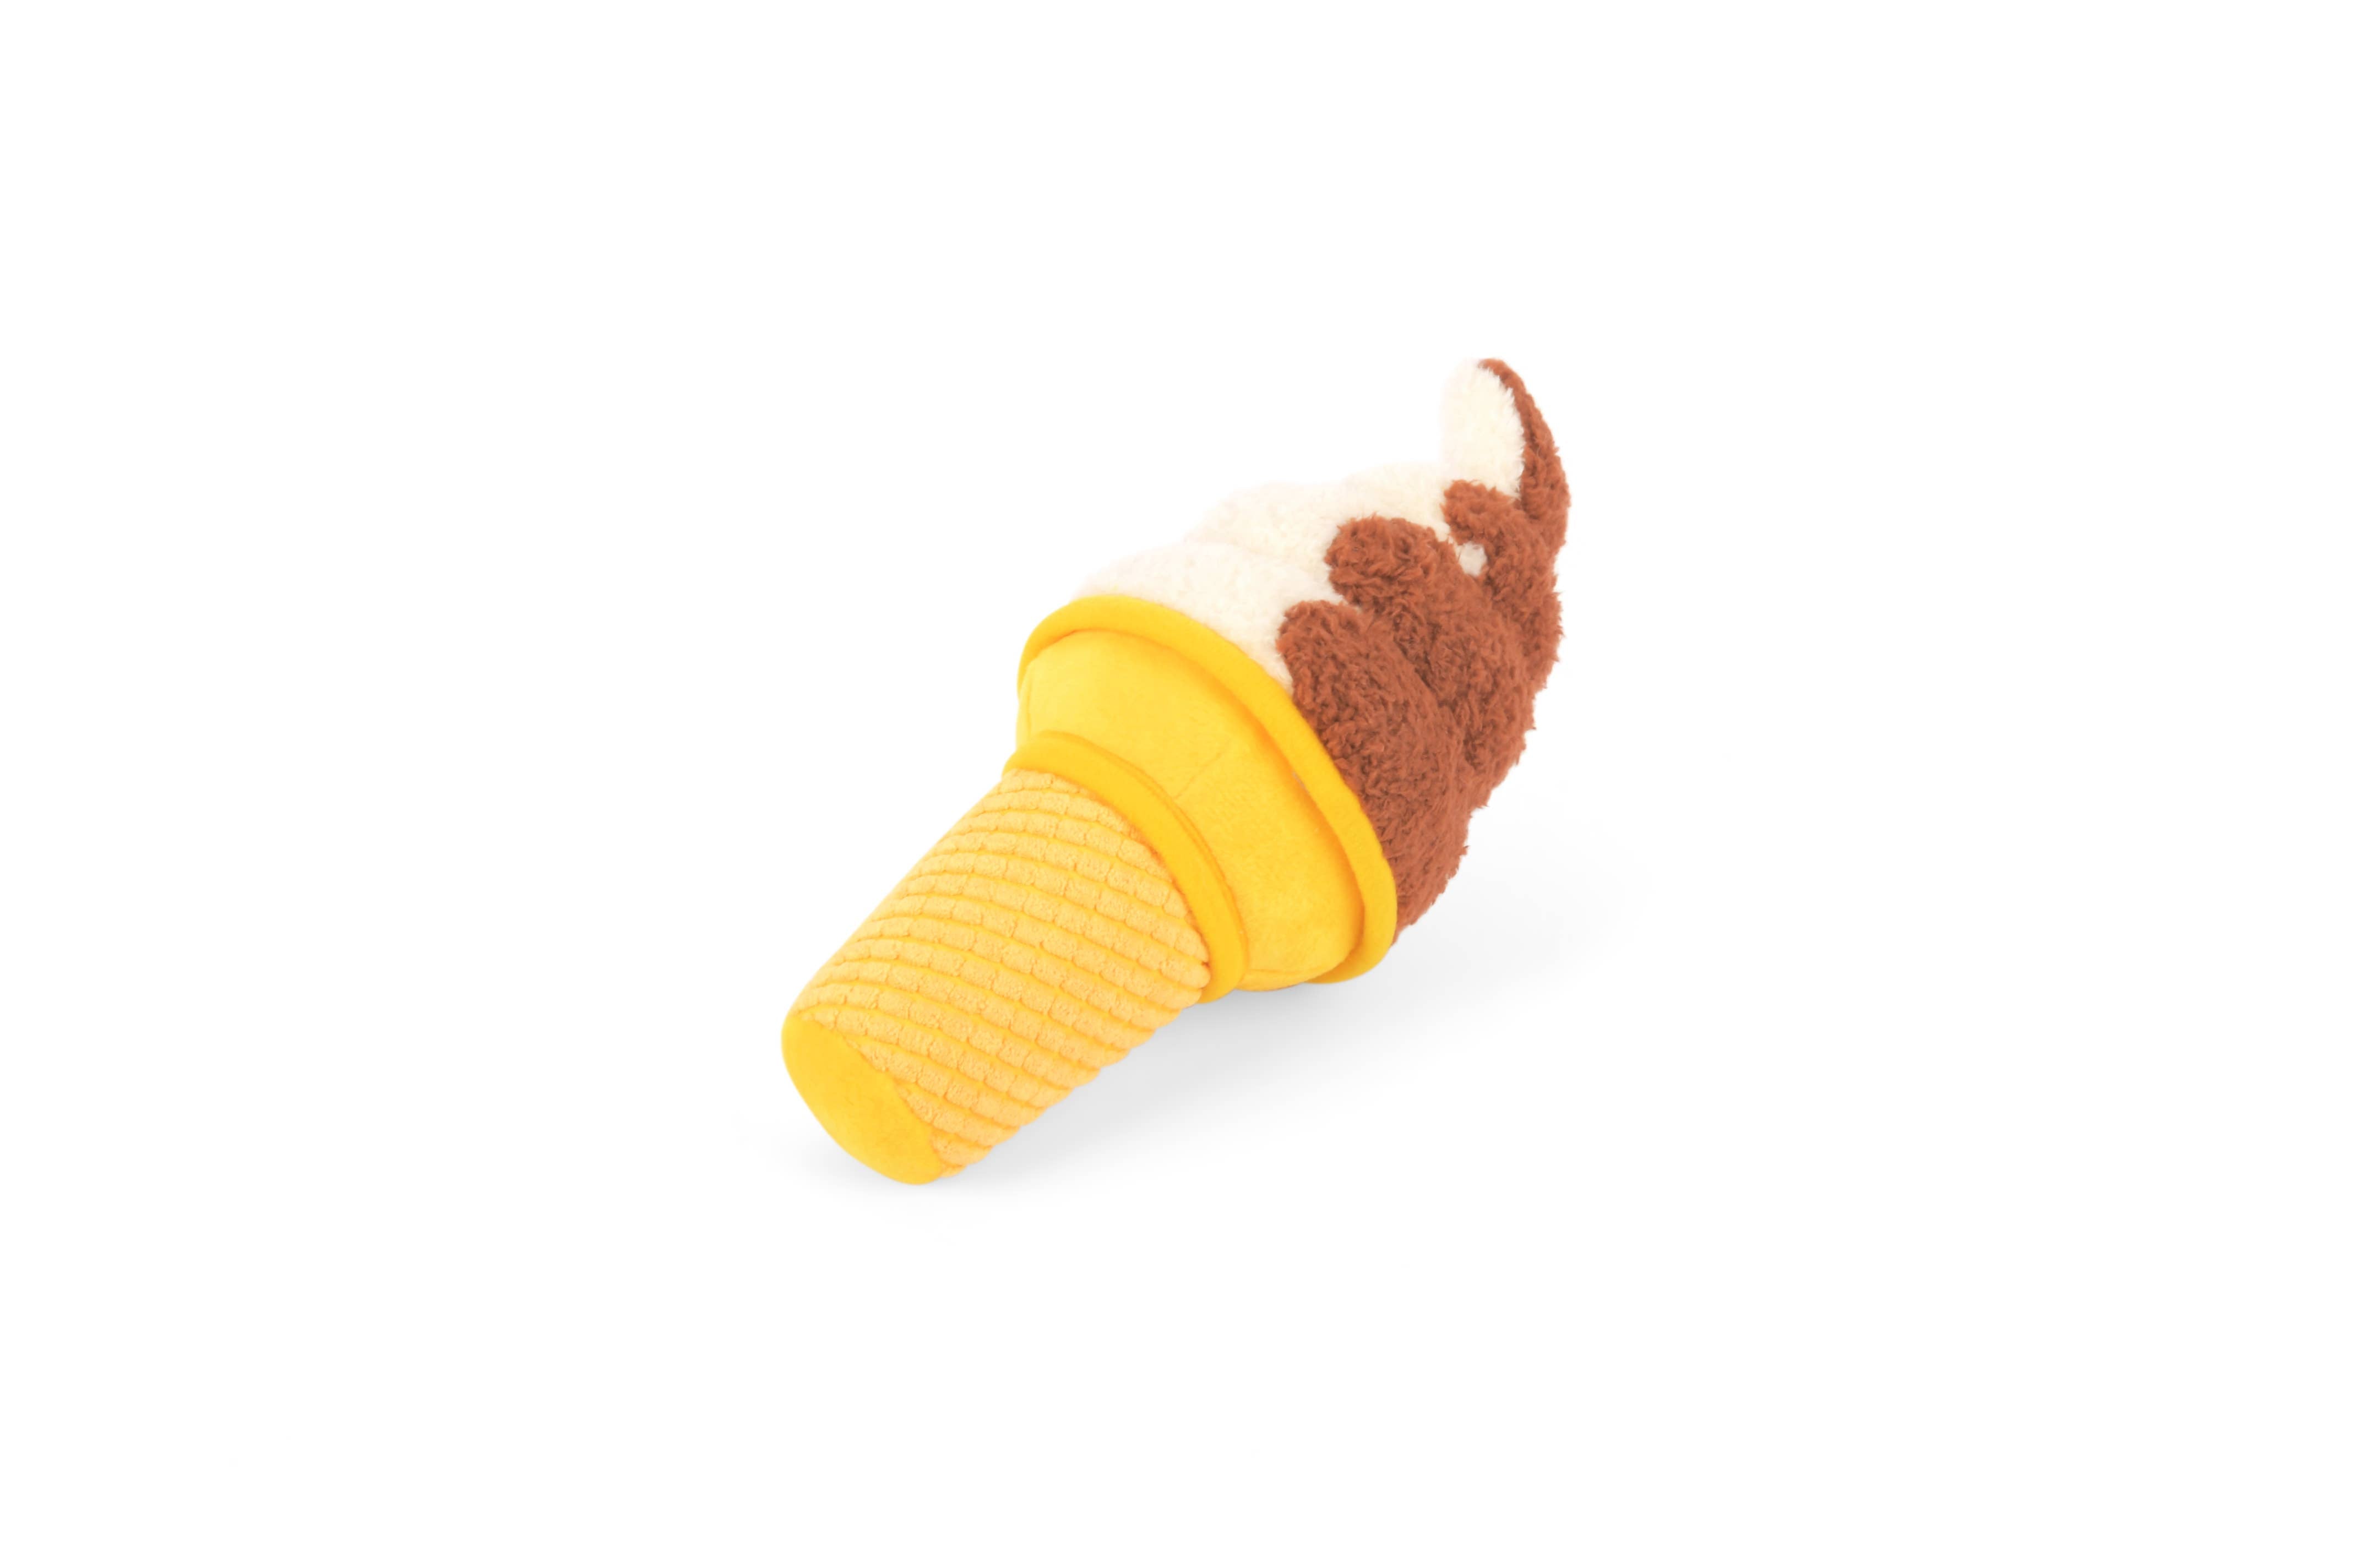 P.L.A.Y. Pet Lifestyle and You - Snack Attack - Swirls n Slobbers Soft Serve